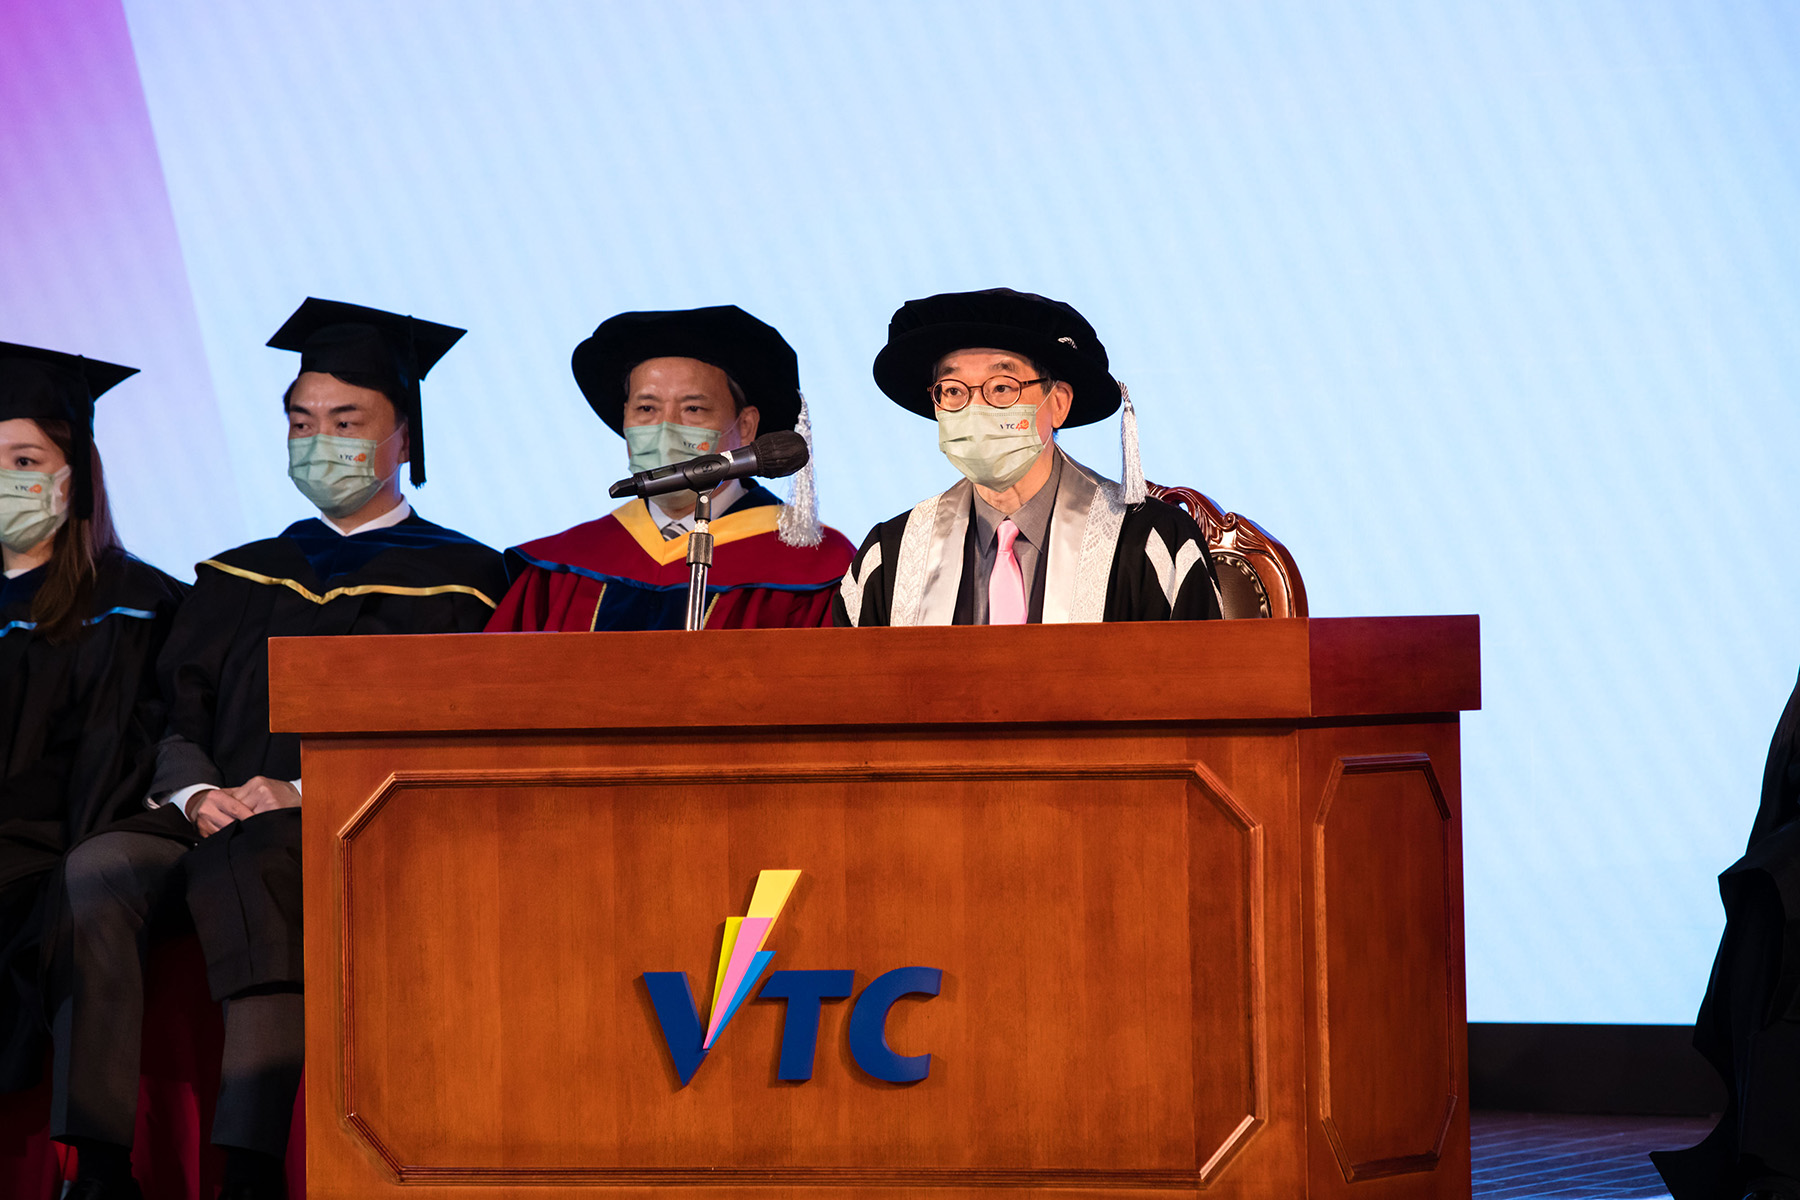 VTC Chairman Mr Tony TAI says the VTC has all along been proactively responding to the demand from society for new skills and talent by incorporating innovation and technology elements into its teaching and learning, developing smart campuses, adopting a cross-disciplinary approach and spearheading industry co-creation projects. This will help students grasp professional knowledge and emerging technologies, as well as accumulate applied skills in the workplace